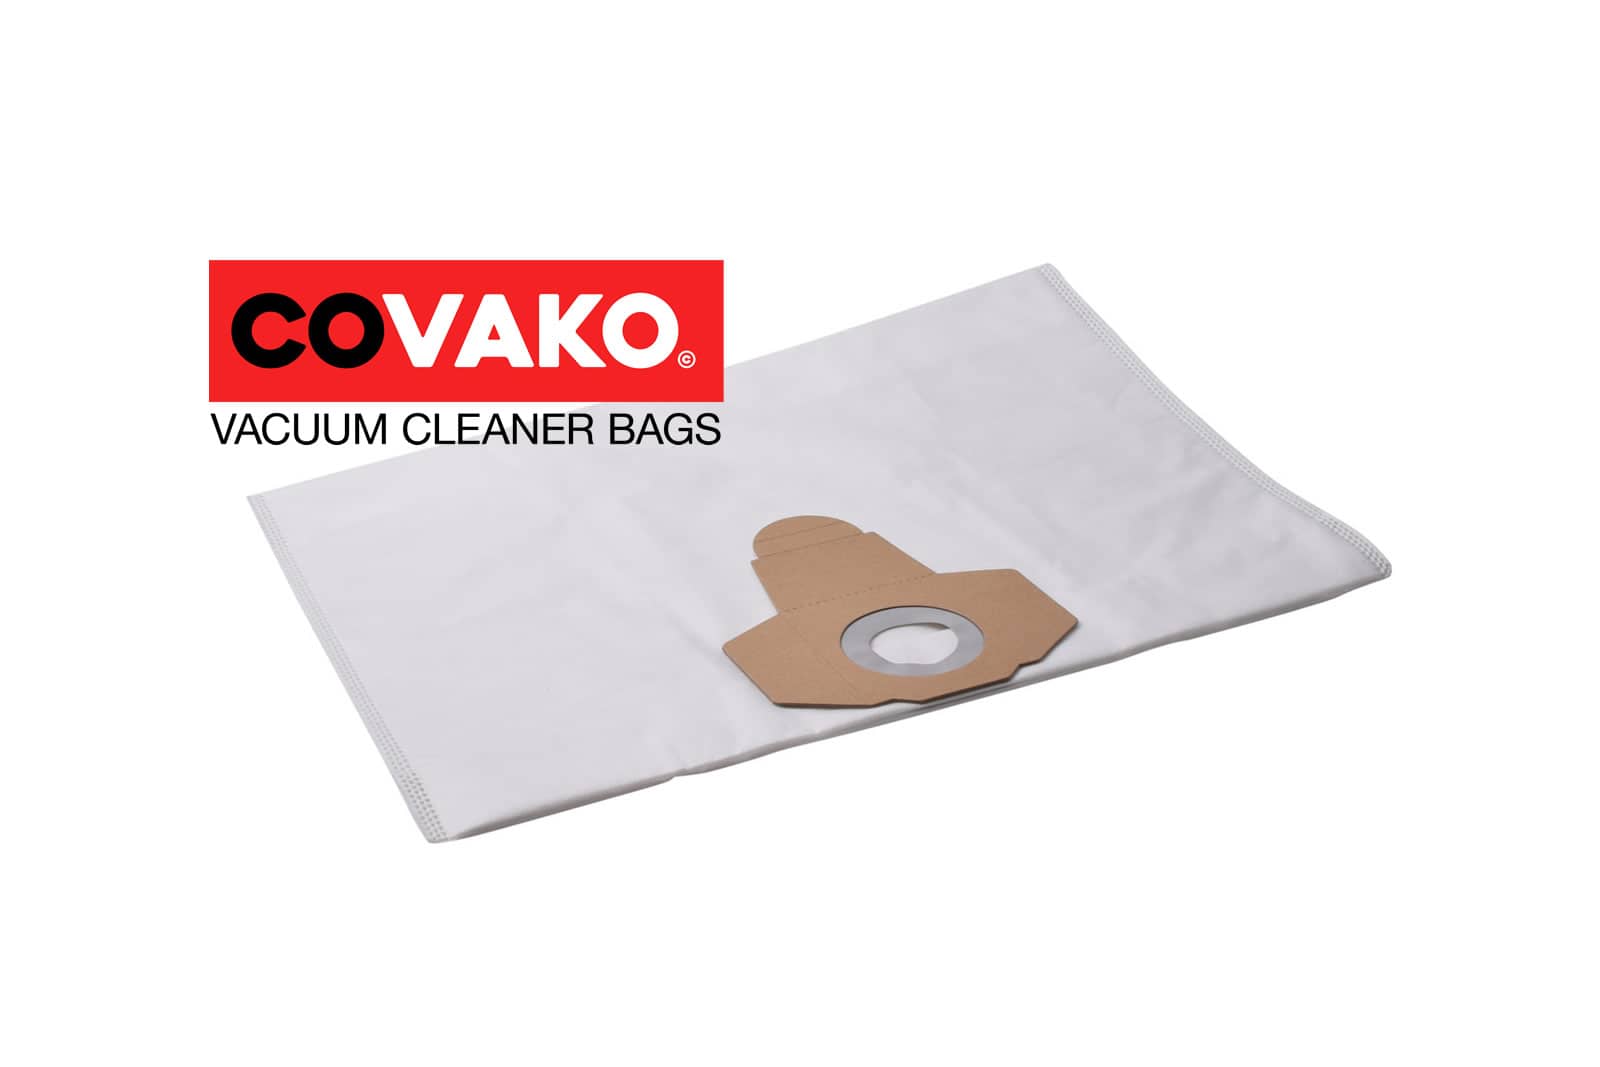 Einhell RT-VC 1500 WM / Synthesis - Einhell vacuum cleaner bags